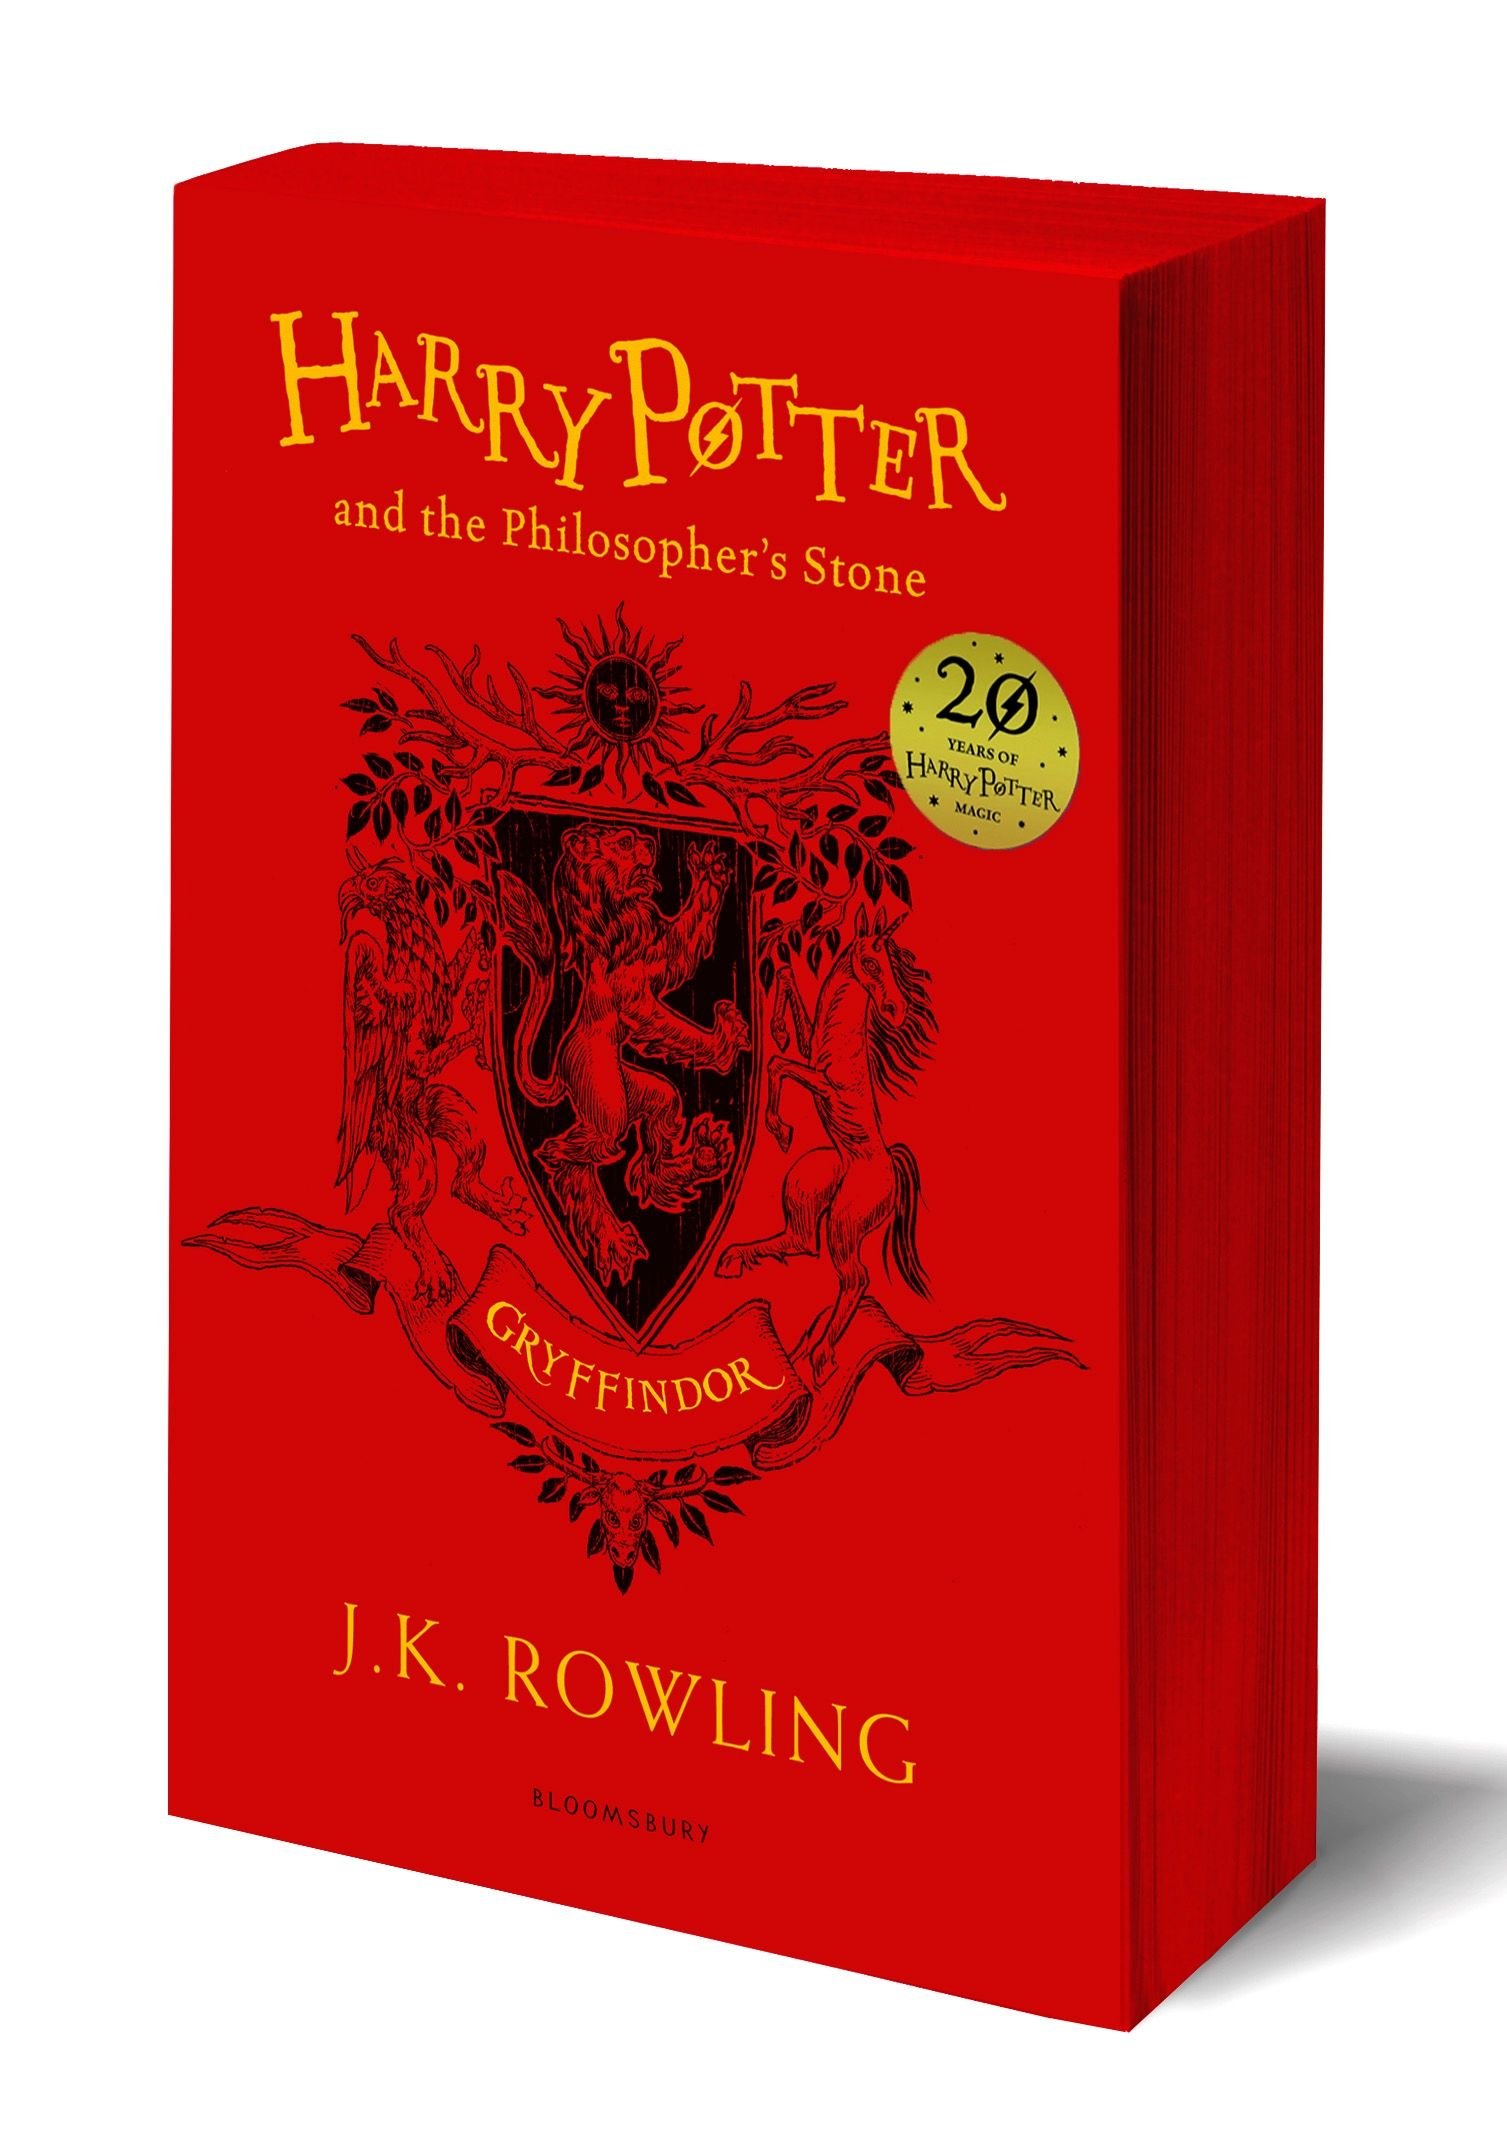 https://wordery.com/jackets/5dfcd041/harry-potter-and-the-philosophers-stone-gryffindor-edition-j-k-rowling-9781408883730.jpg